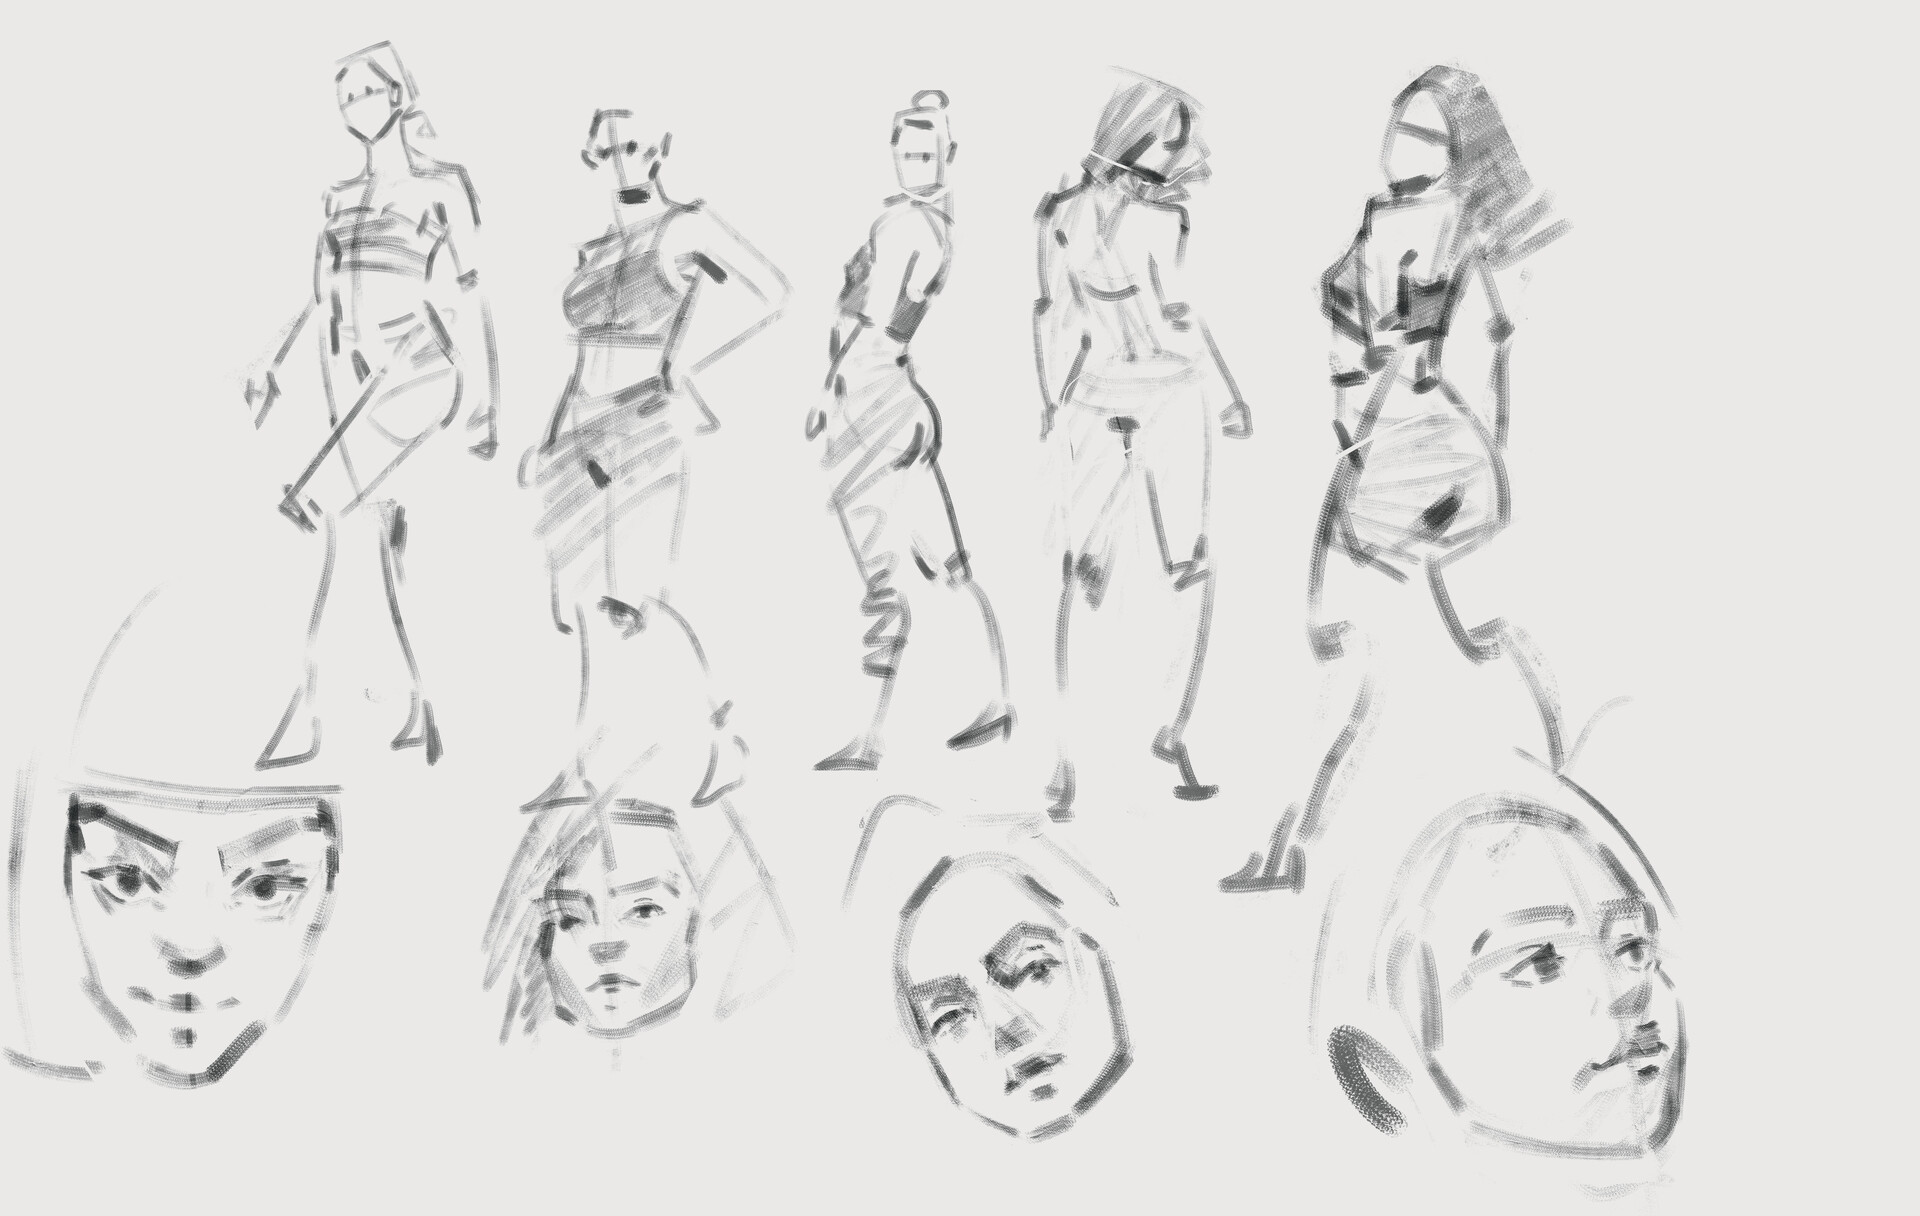 ArtStation - 매일 스케치 (Daily sketches)